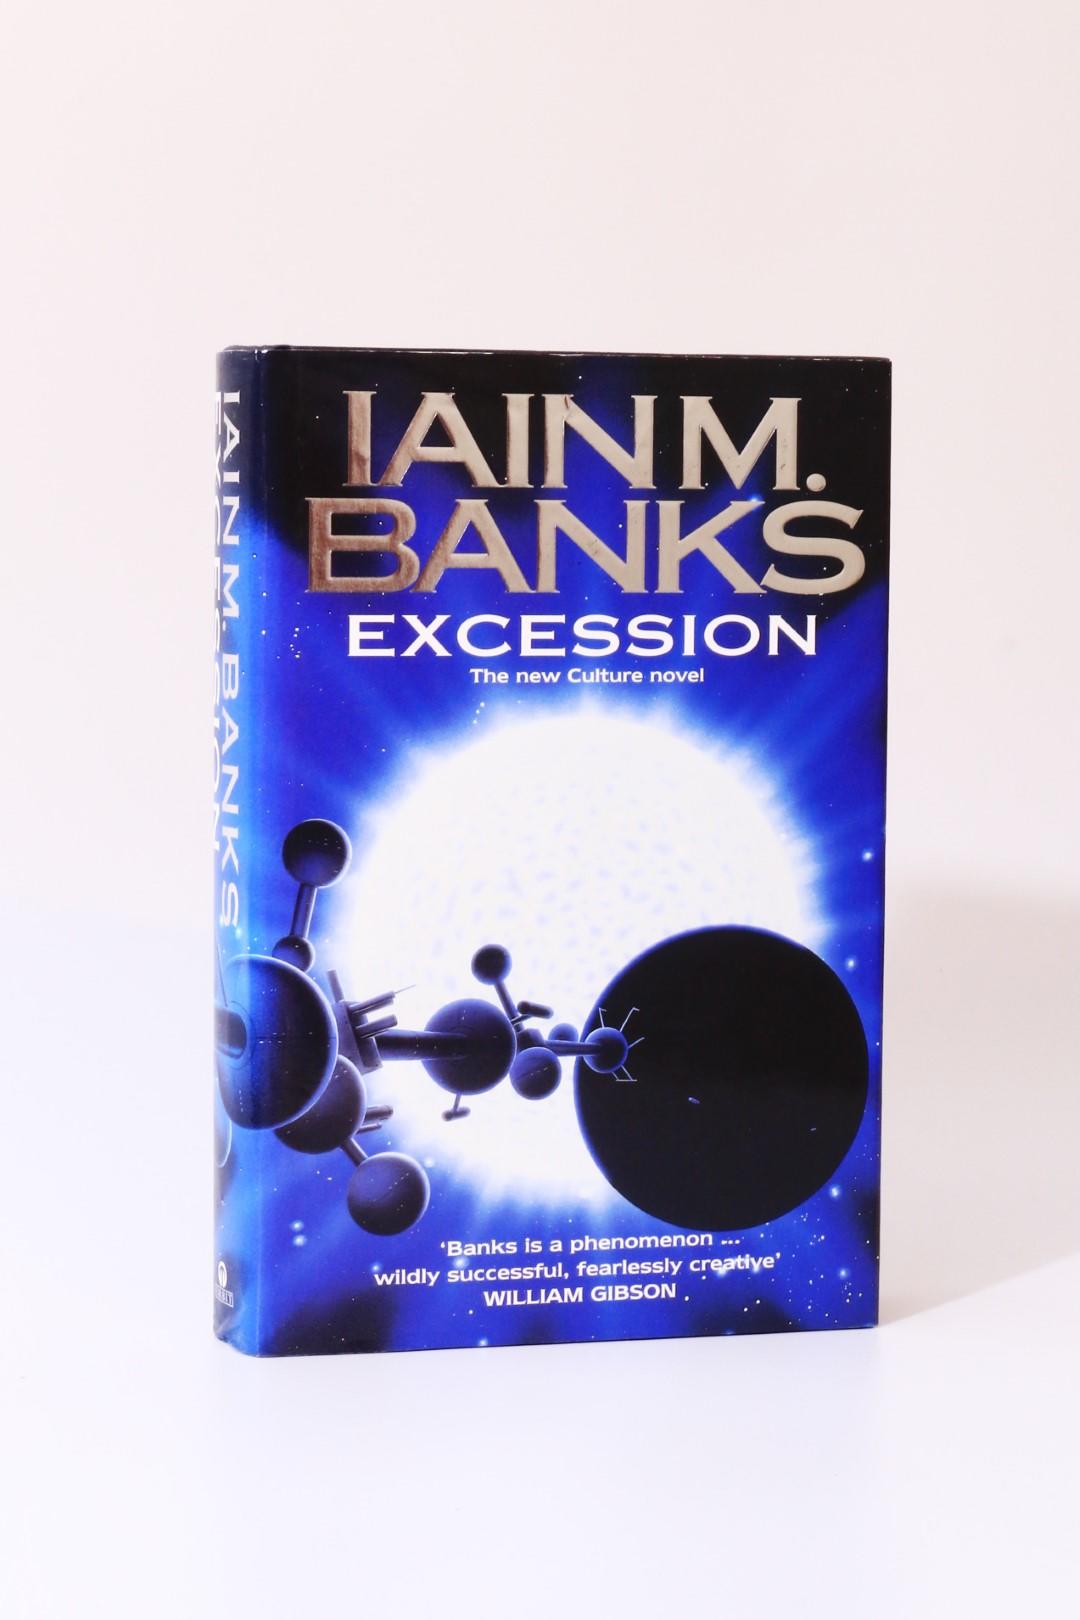 Iain M. Banks - Excession - Orbit, 1996, First Edition.